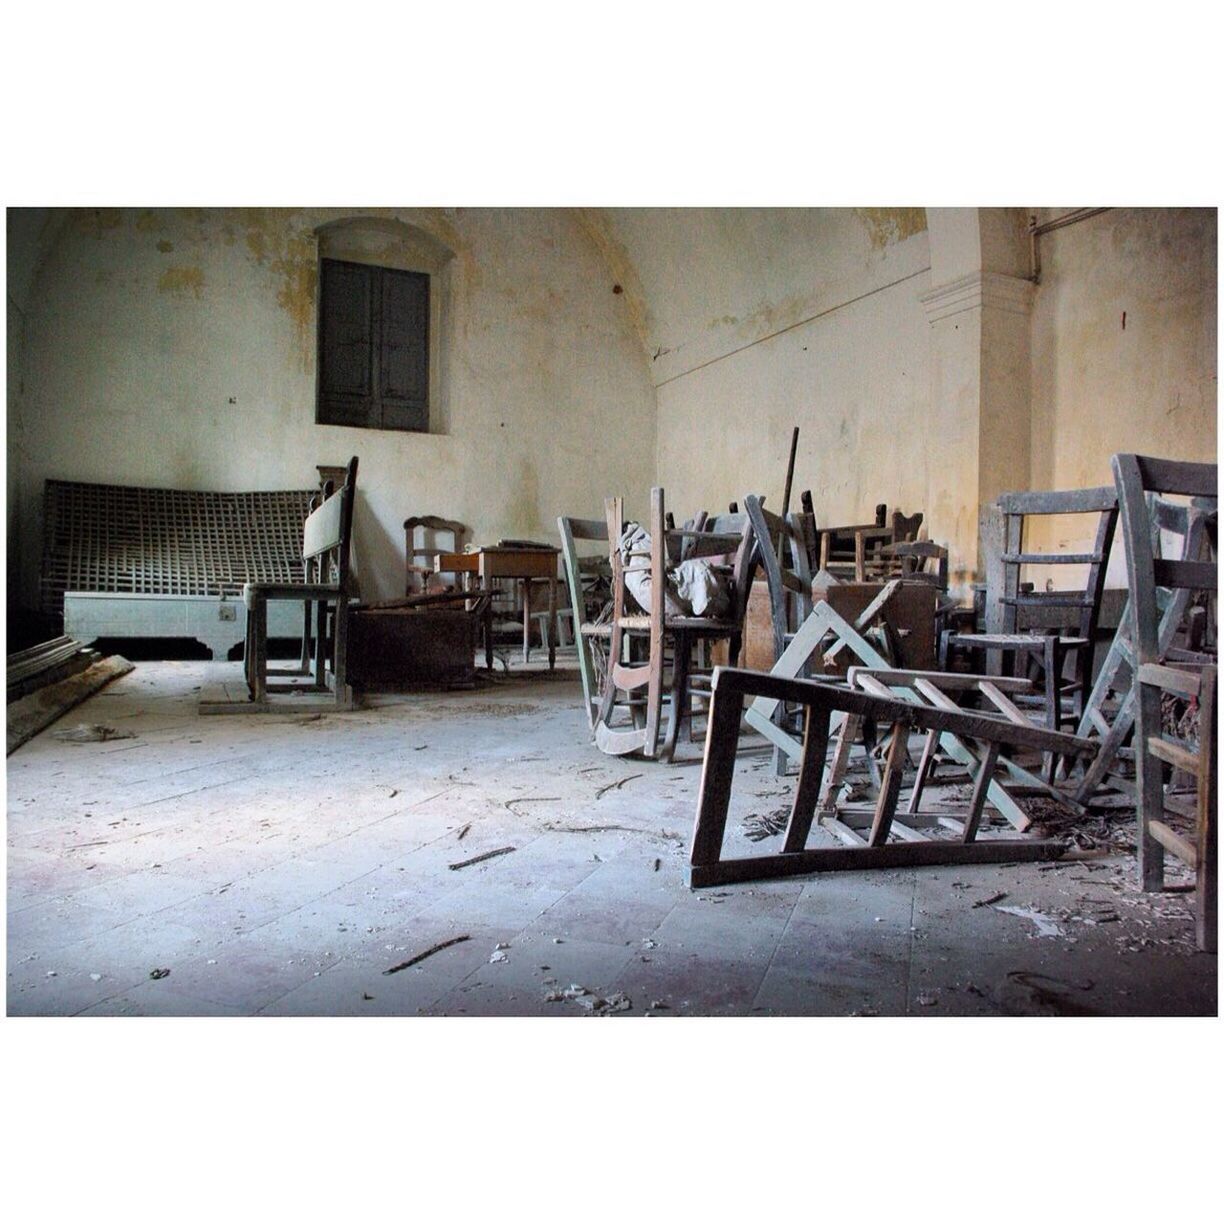 transfer print, auto post production filter, chair, built structure, architecture, empty, abandoned, absence, building exterior, old, house, obsolete, damaged, day, wood - material, no people, wall, deterioration, run-down, table